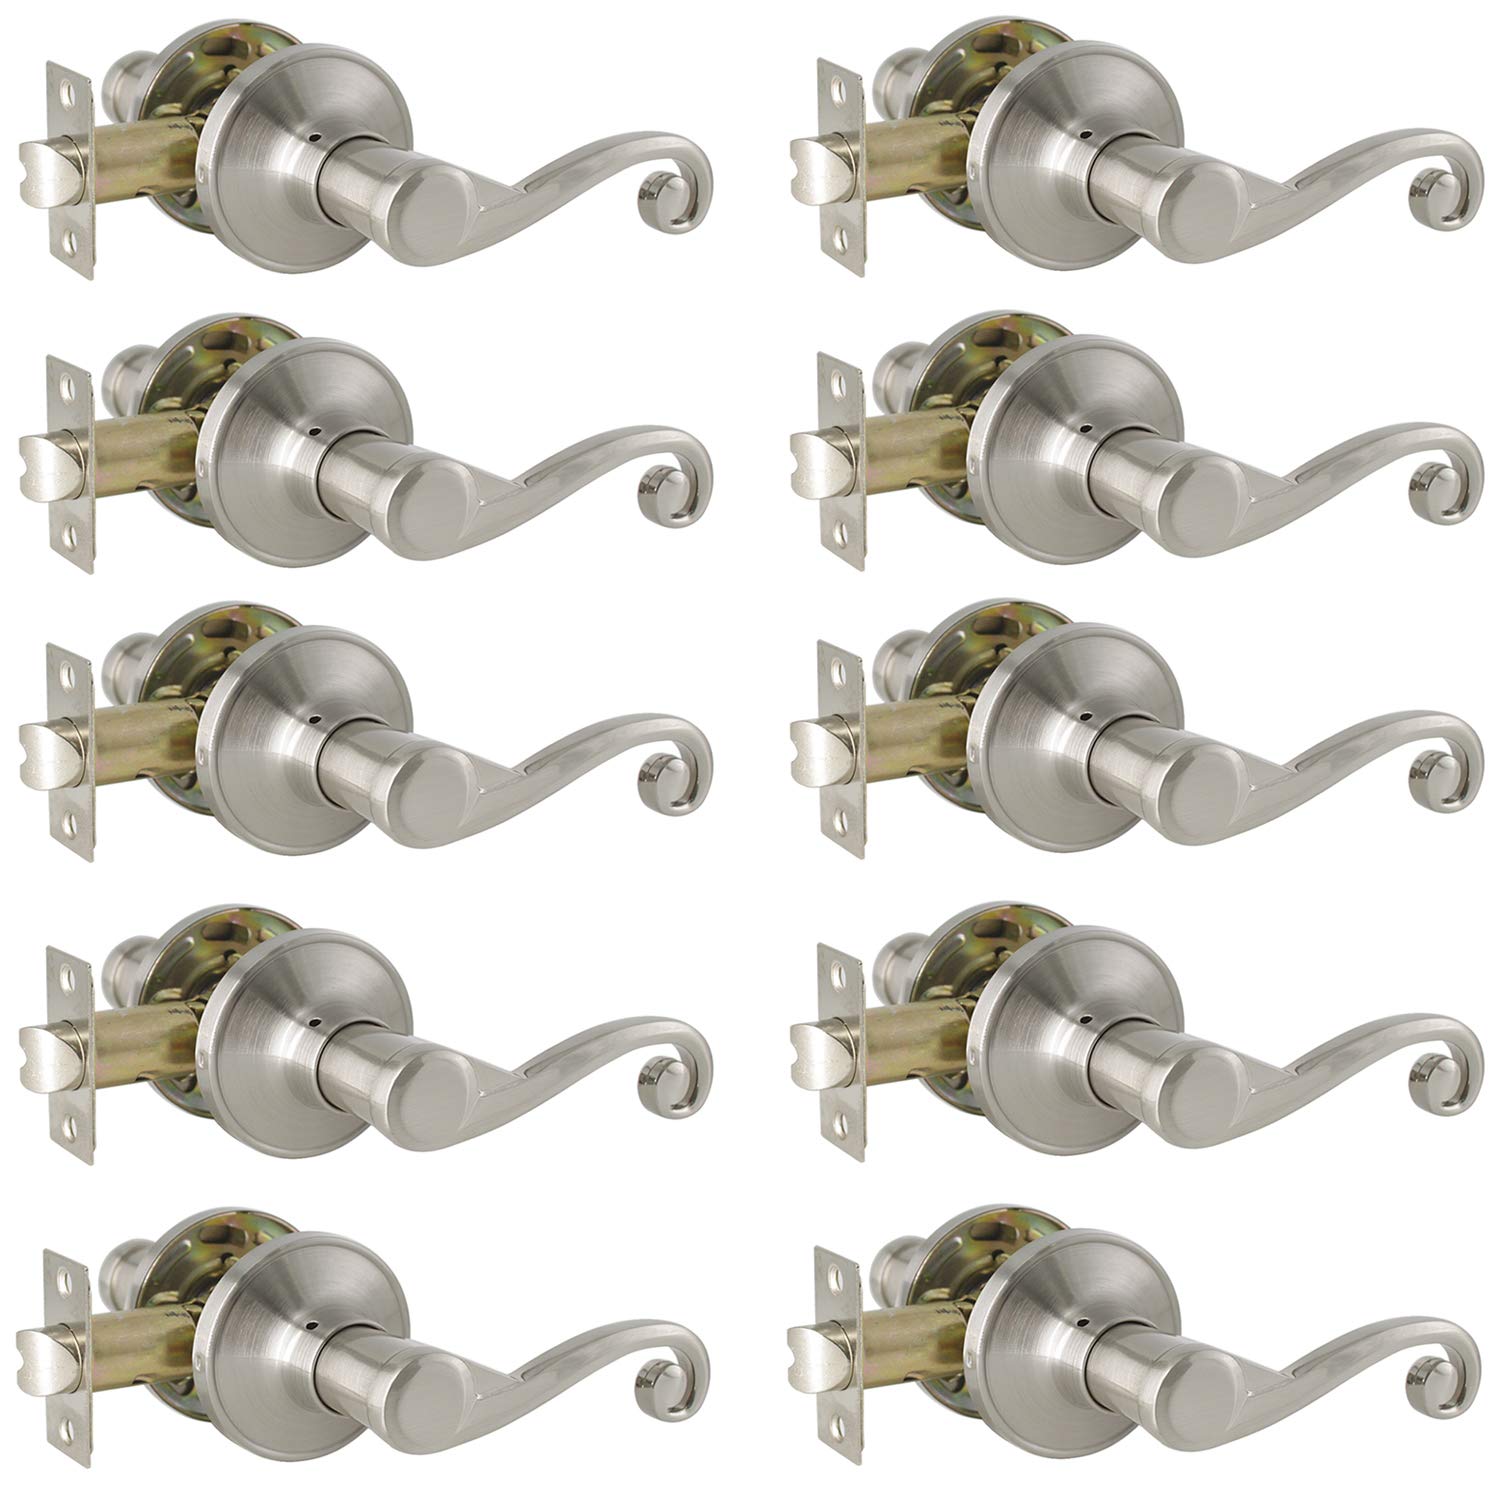 Probrico 10 Pack Satin Nickel Door Levers for Hall and Closet,Passage Function Contractor Pack,Square Lockset Leverset Modern Style,Interior Door